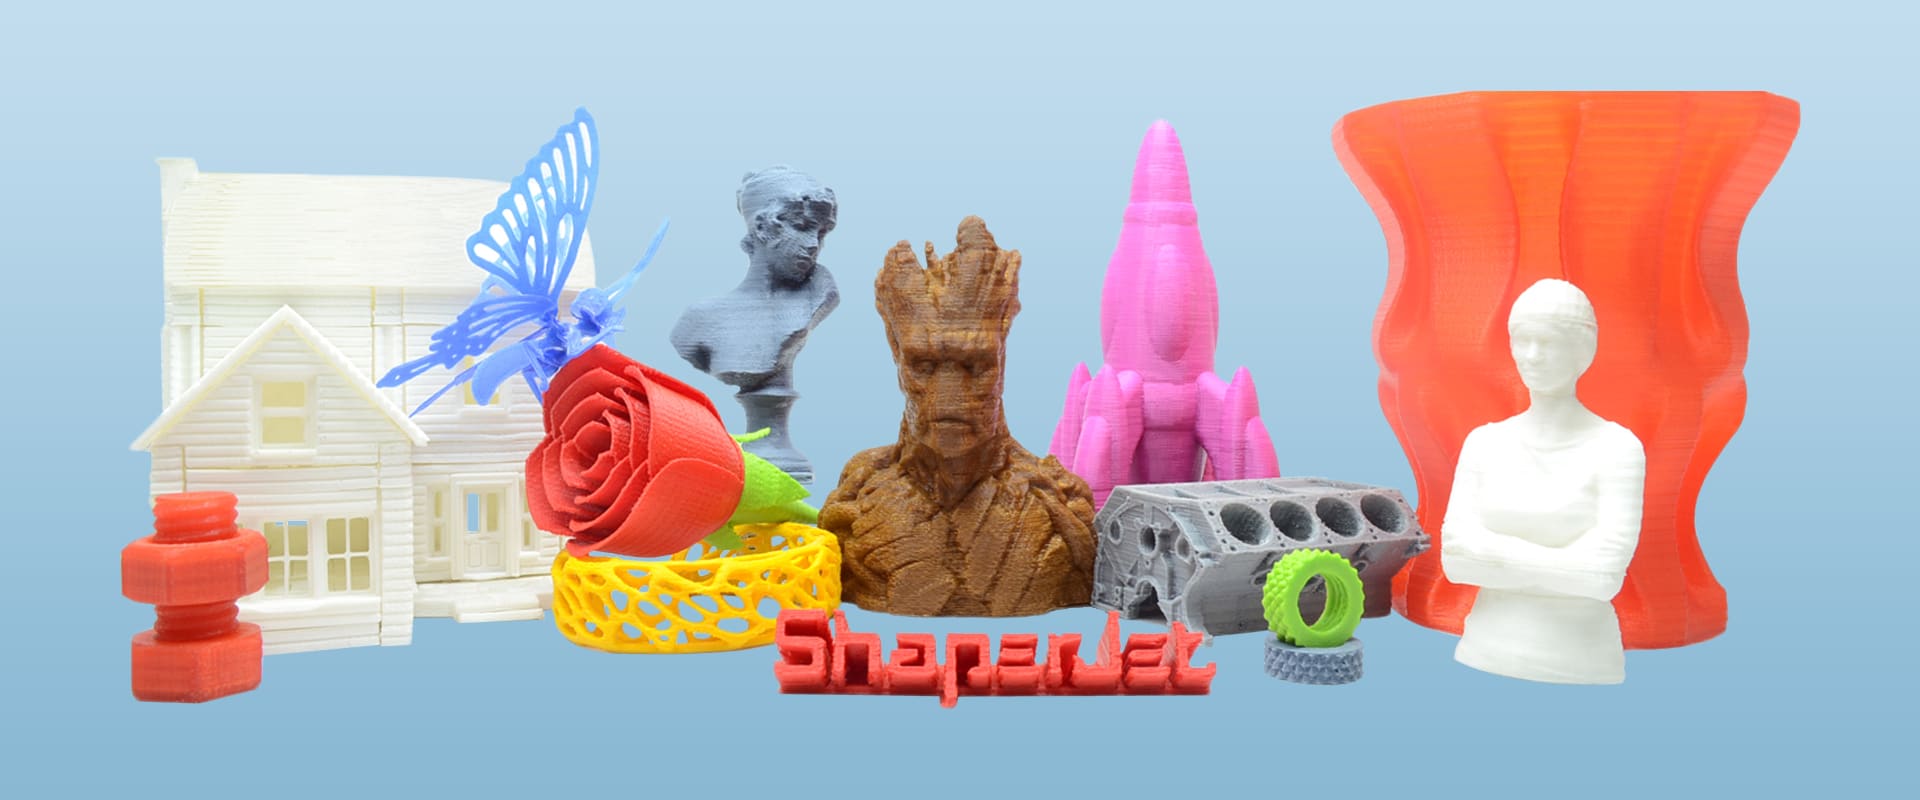 10 Things to 3D Print (Updated: April 2021)